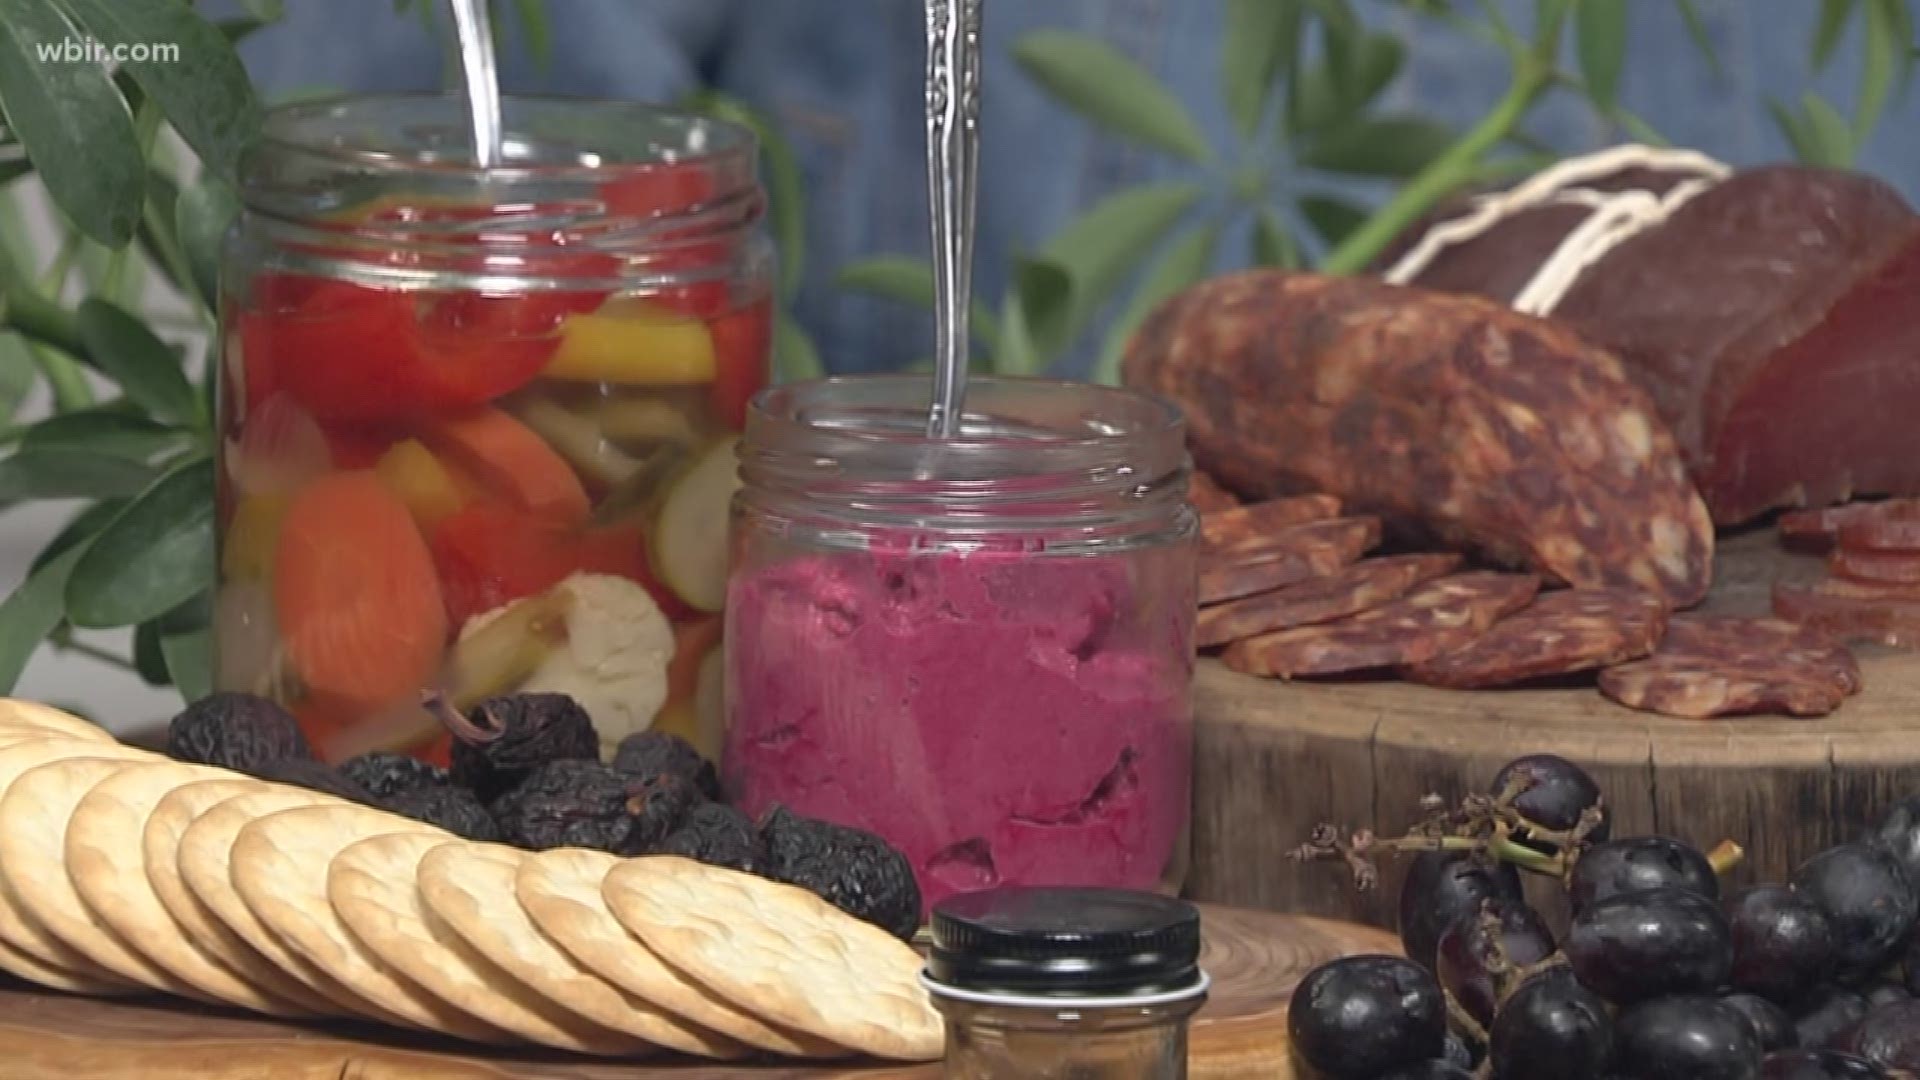 Century Harvest Farms shows us how to make beet hummus.